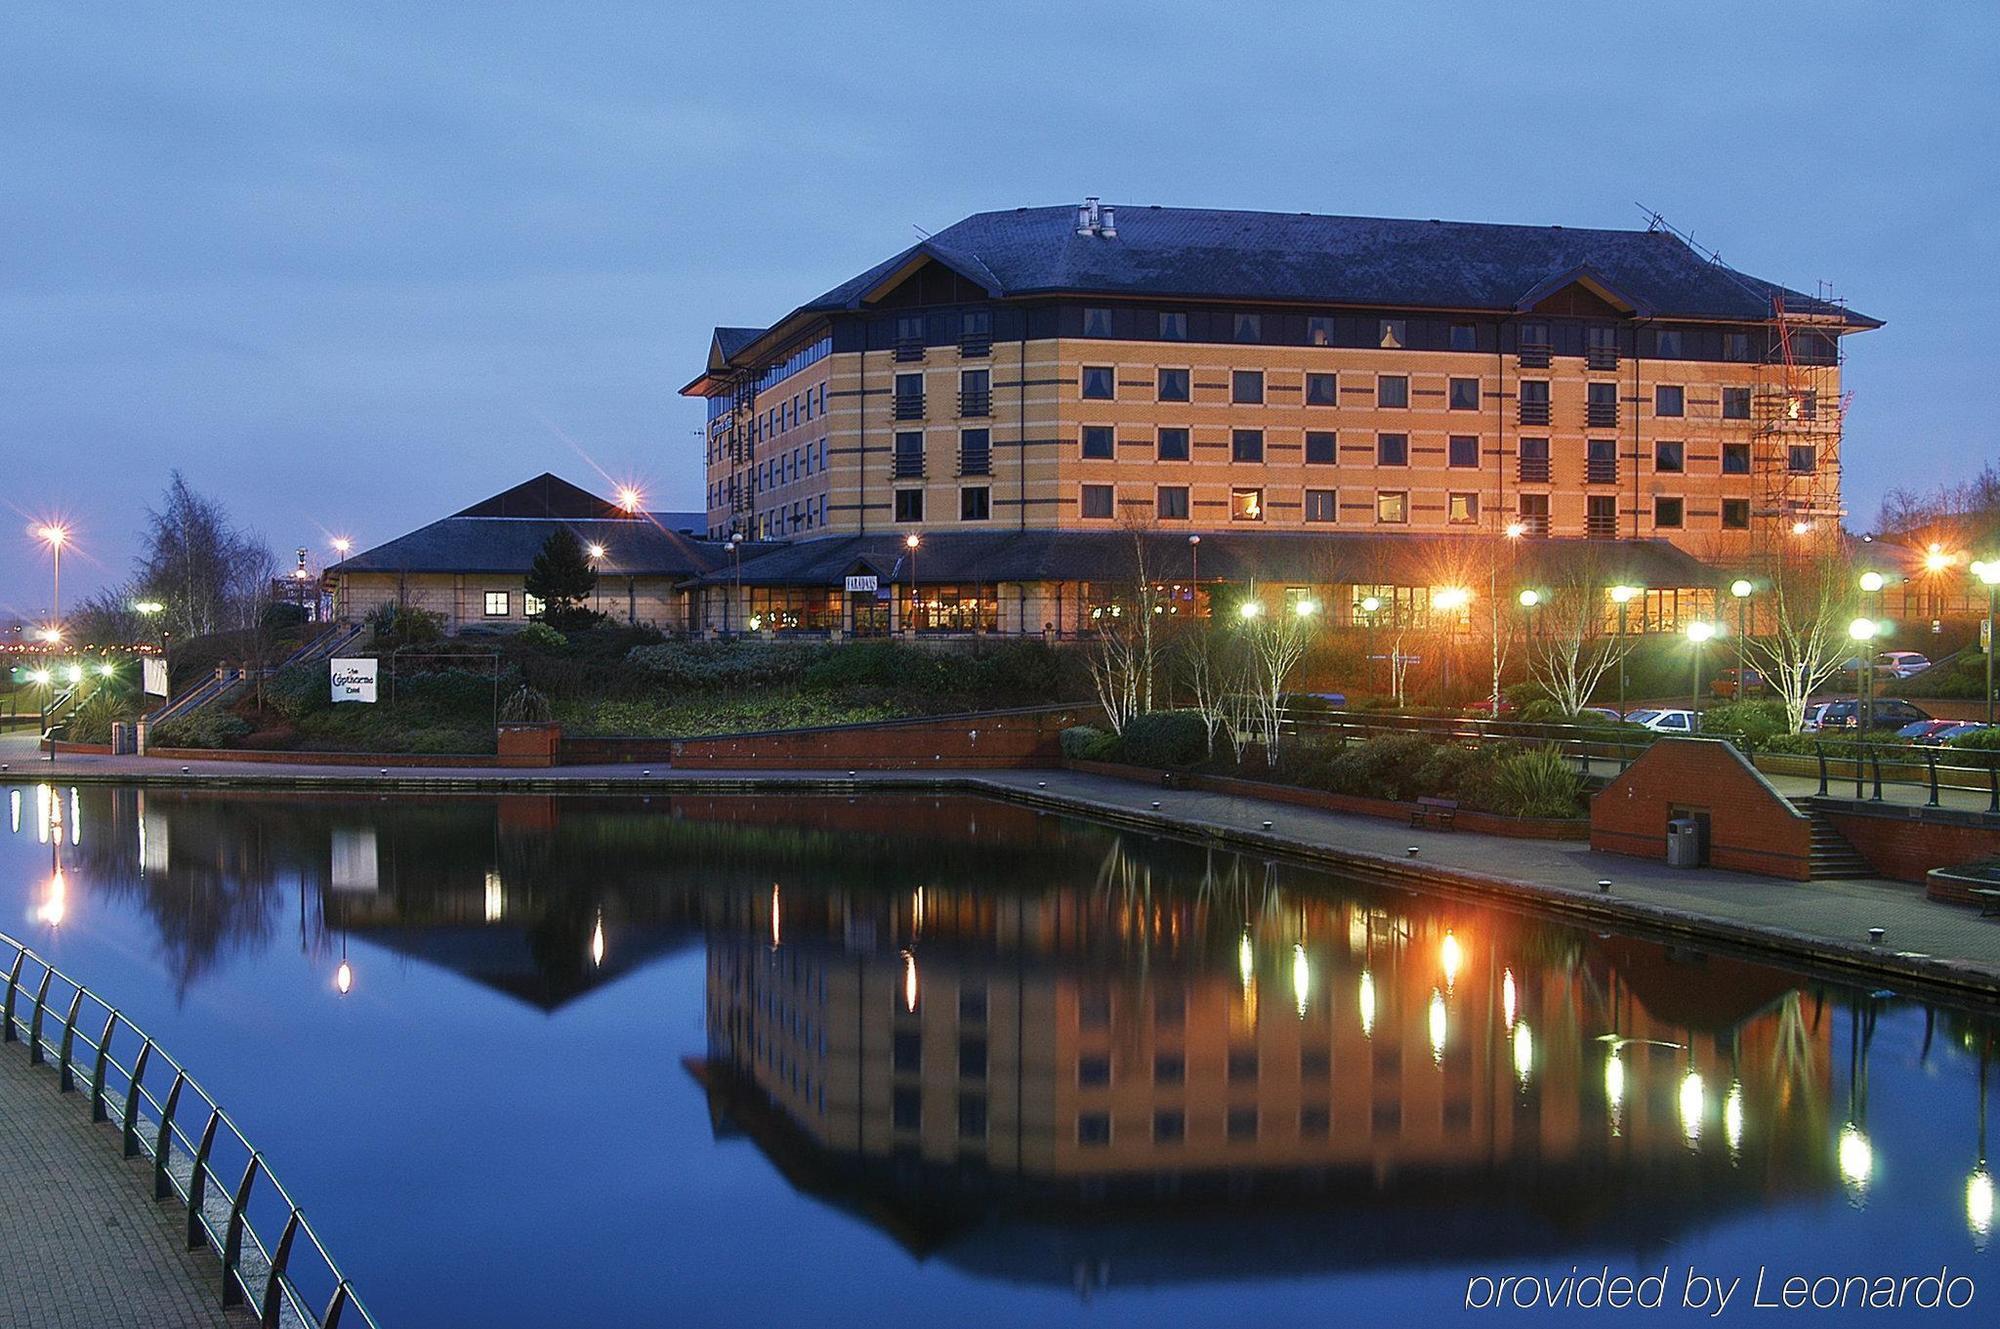 Copthorne Hotel Merry Hill Dudley Exterior photo